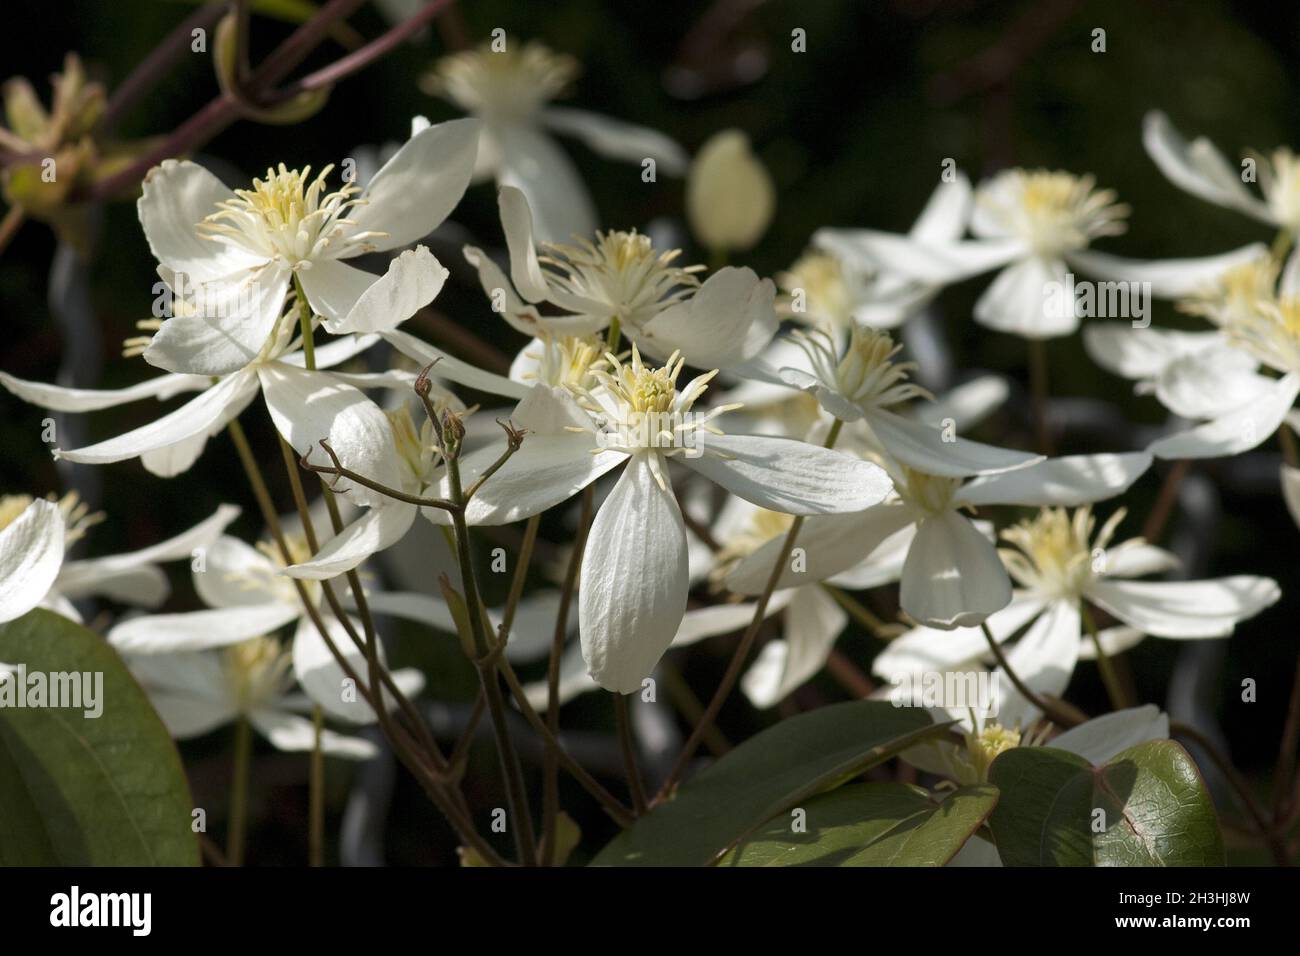 Armands, Waldrebe, Clematis Foto Stock